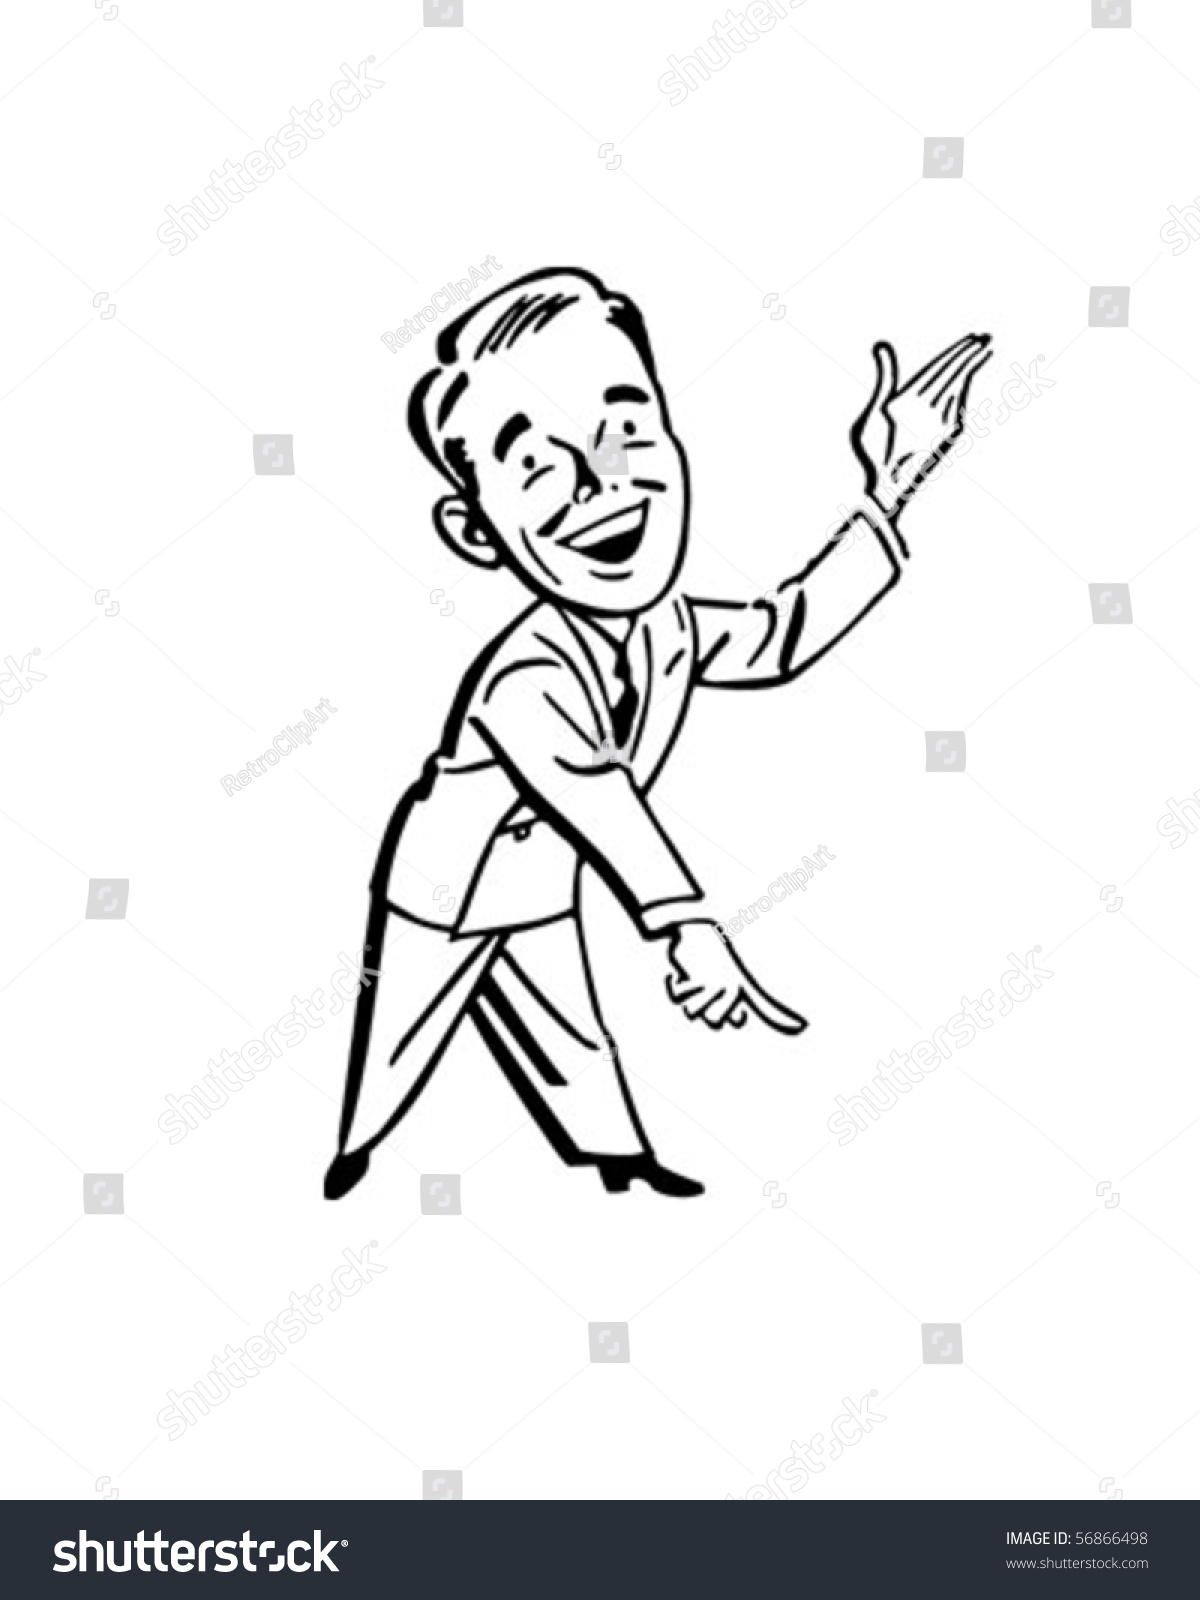 man pointing clipart - photo #30